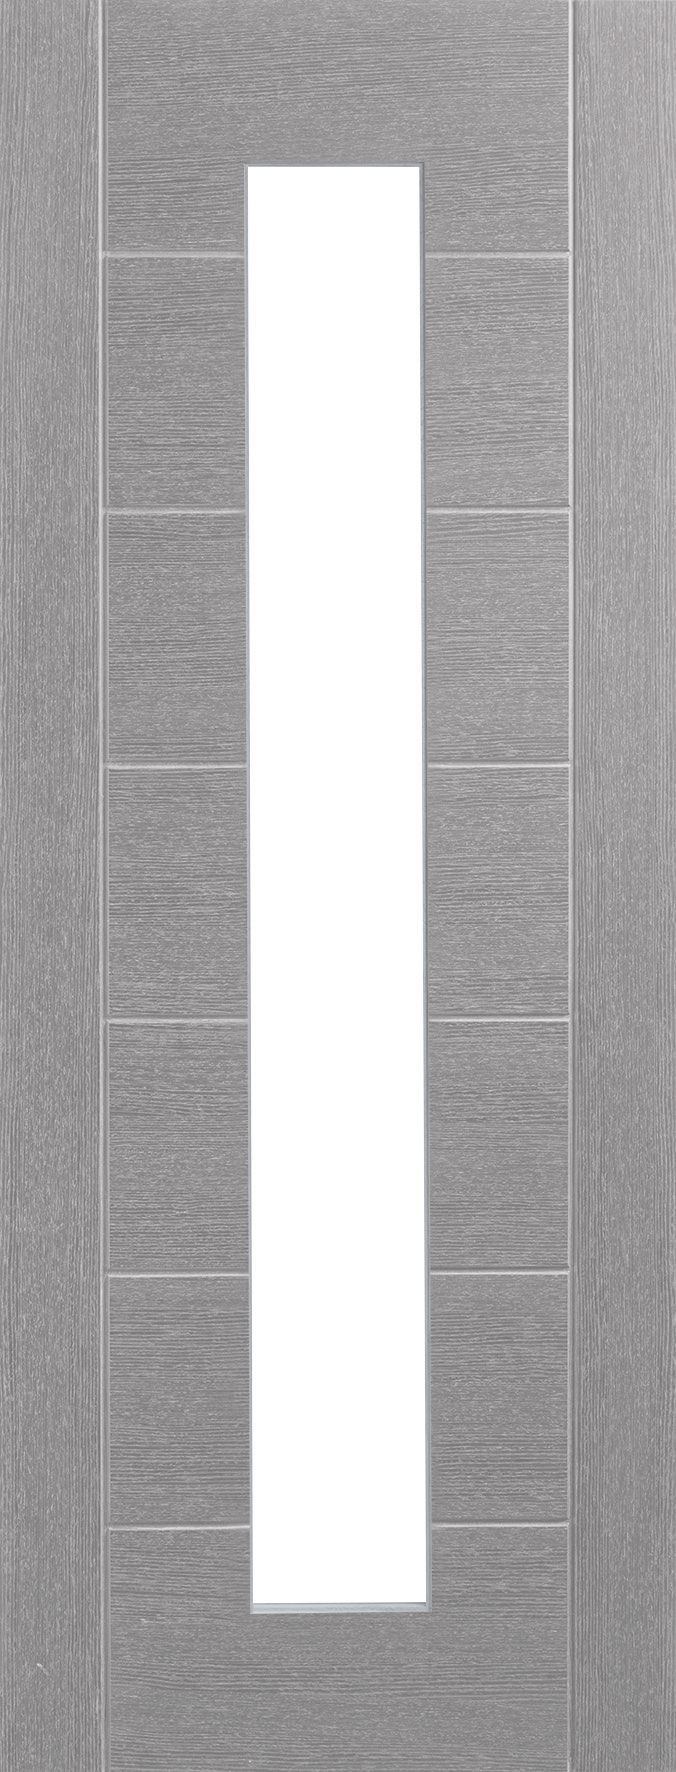 XL Joinery Palermo Pre-Finished Light Grey Internal Clear Glazed Door